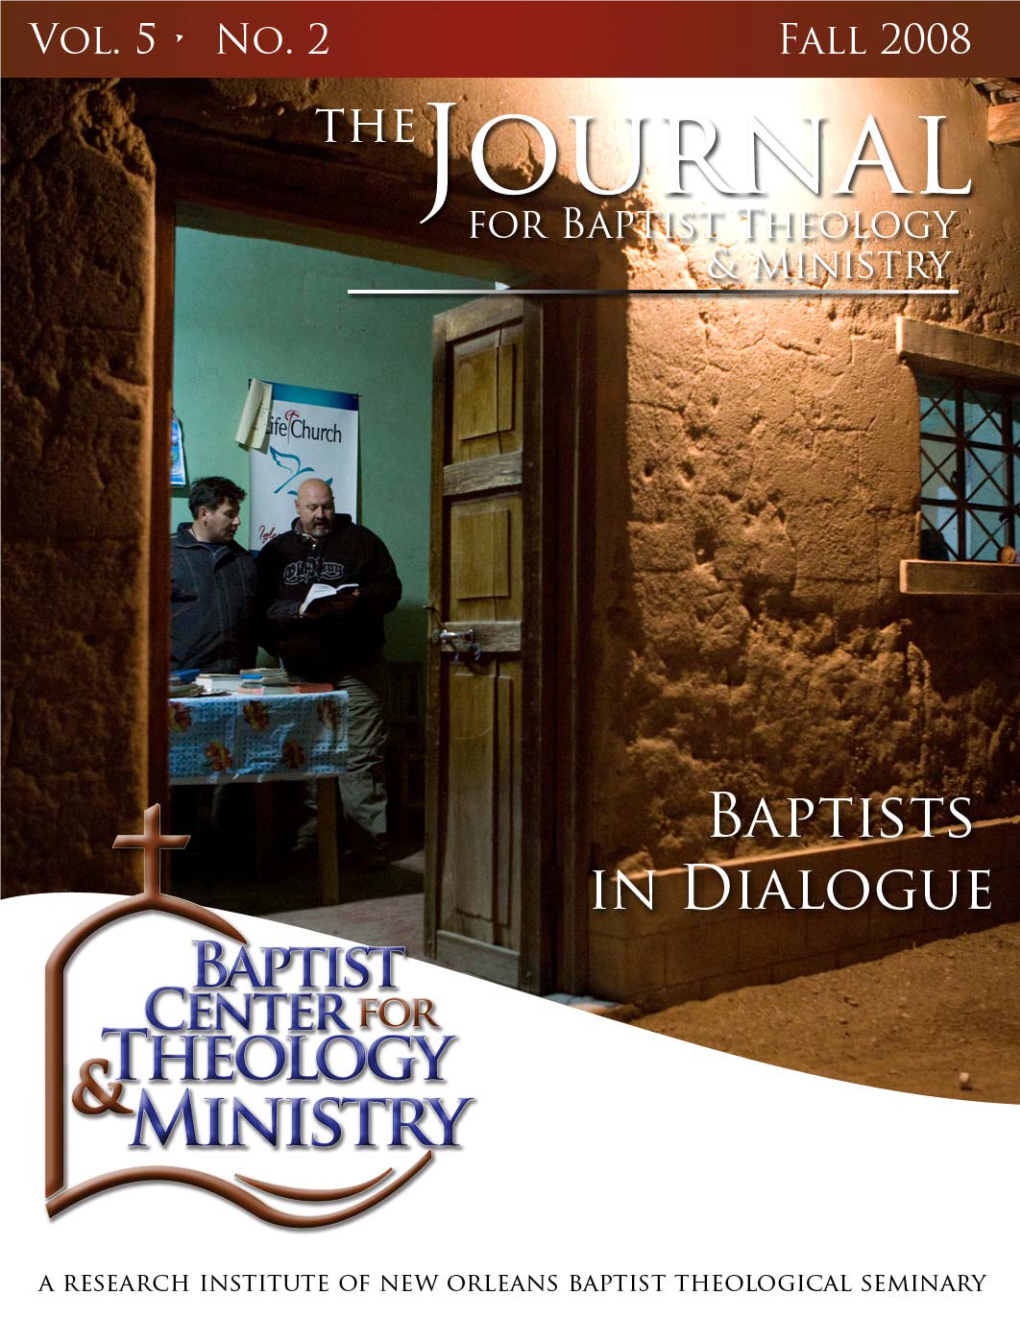 0 Jbtm Vol. 5, No. 2 Baptists in Dialogue Cover Page Goes